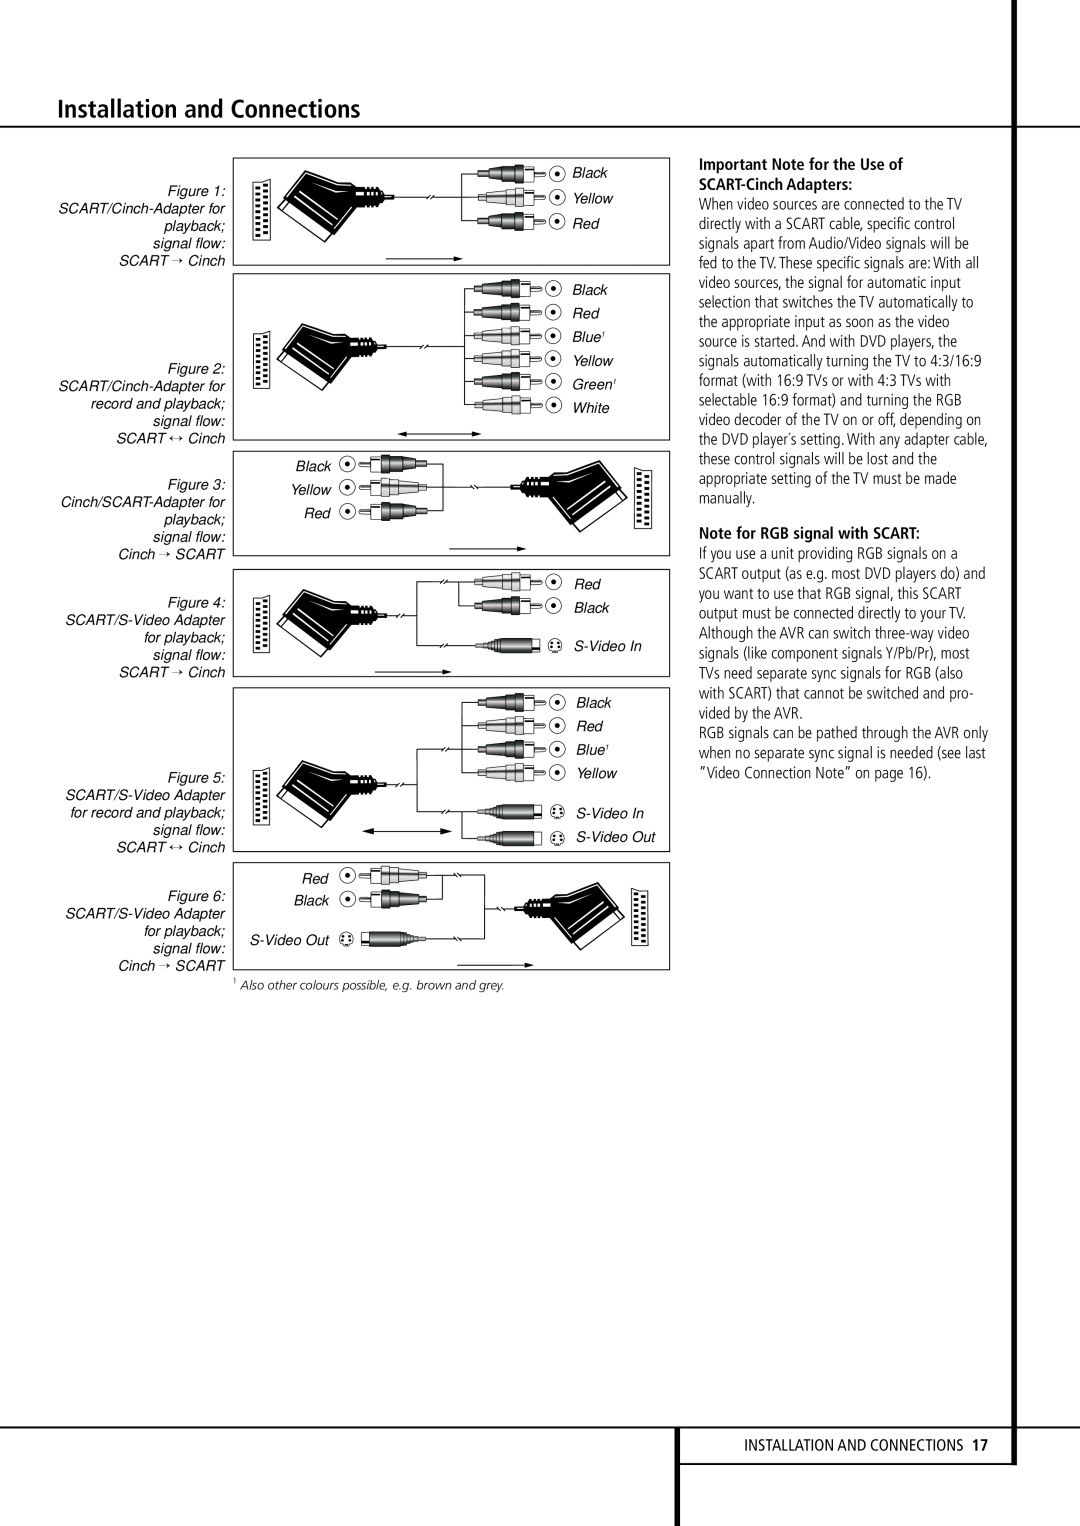 Harman-Kardon AVR 430 owner manual Important Note for the Use of SCART-CinchAdapters, Note for RGB signal with SCART 